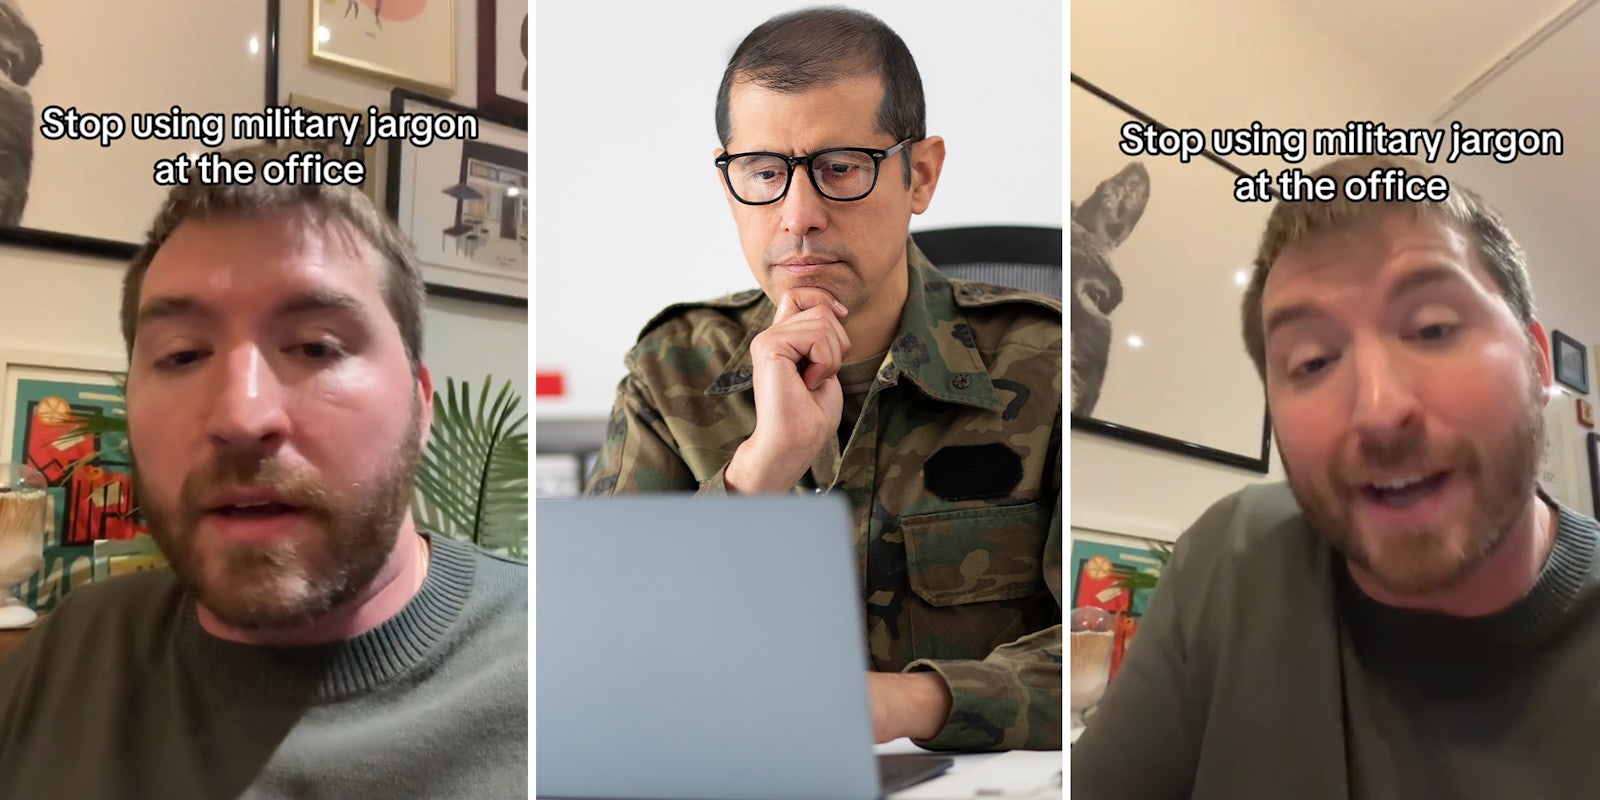 Worker says he’s tired of colleagues who use military jargon in the office